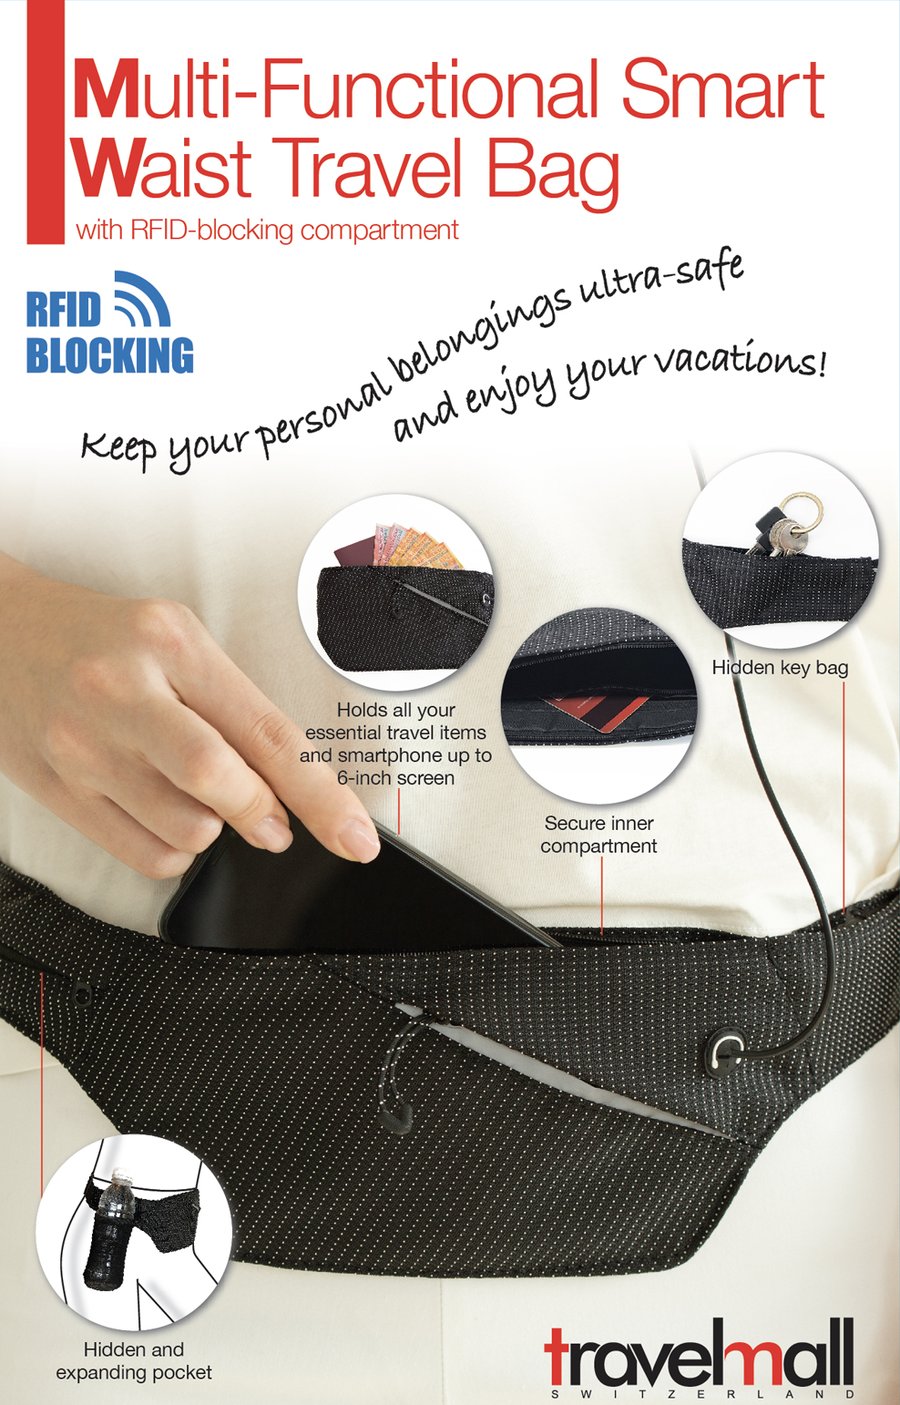 Travelmall Multi-Functional Smart Waist Travel Bag With RFID Blocking Compartment